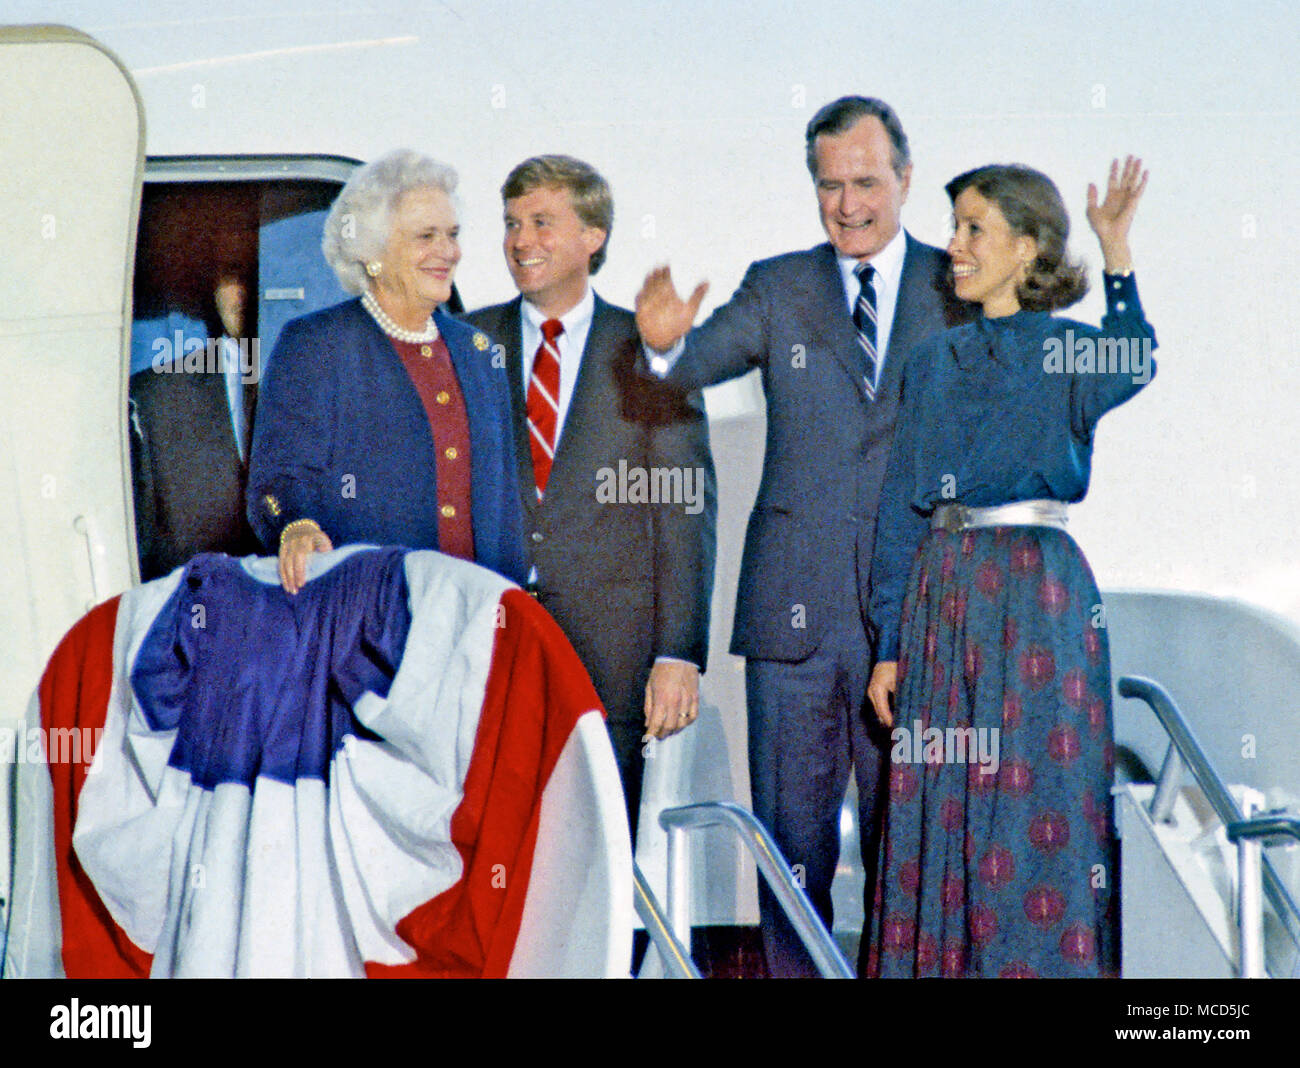 United States President-elect George H.W. Bush and Vice President-elect Dan Quayle return to Andrews Air Force Base, just outside Washington, DC after winning the 1988 Presidential Election on November 9, 1988. From left to right: Barbara Bush, VP-elect Quayle, President-elect Bush, and Marilyn Quayle.Credit: Ron Sachs/CNP /MediaPunch Stock Photo